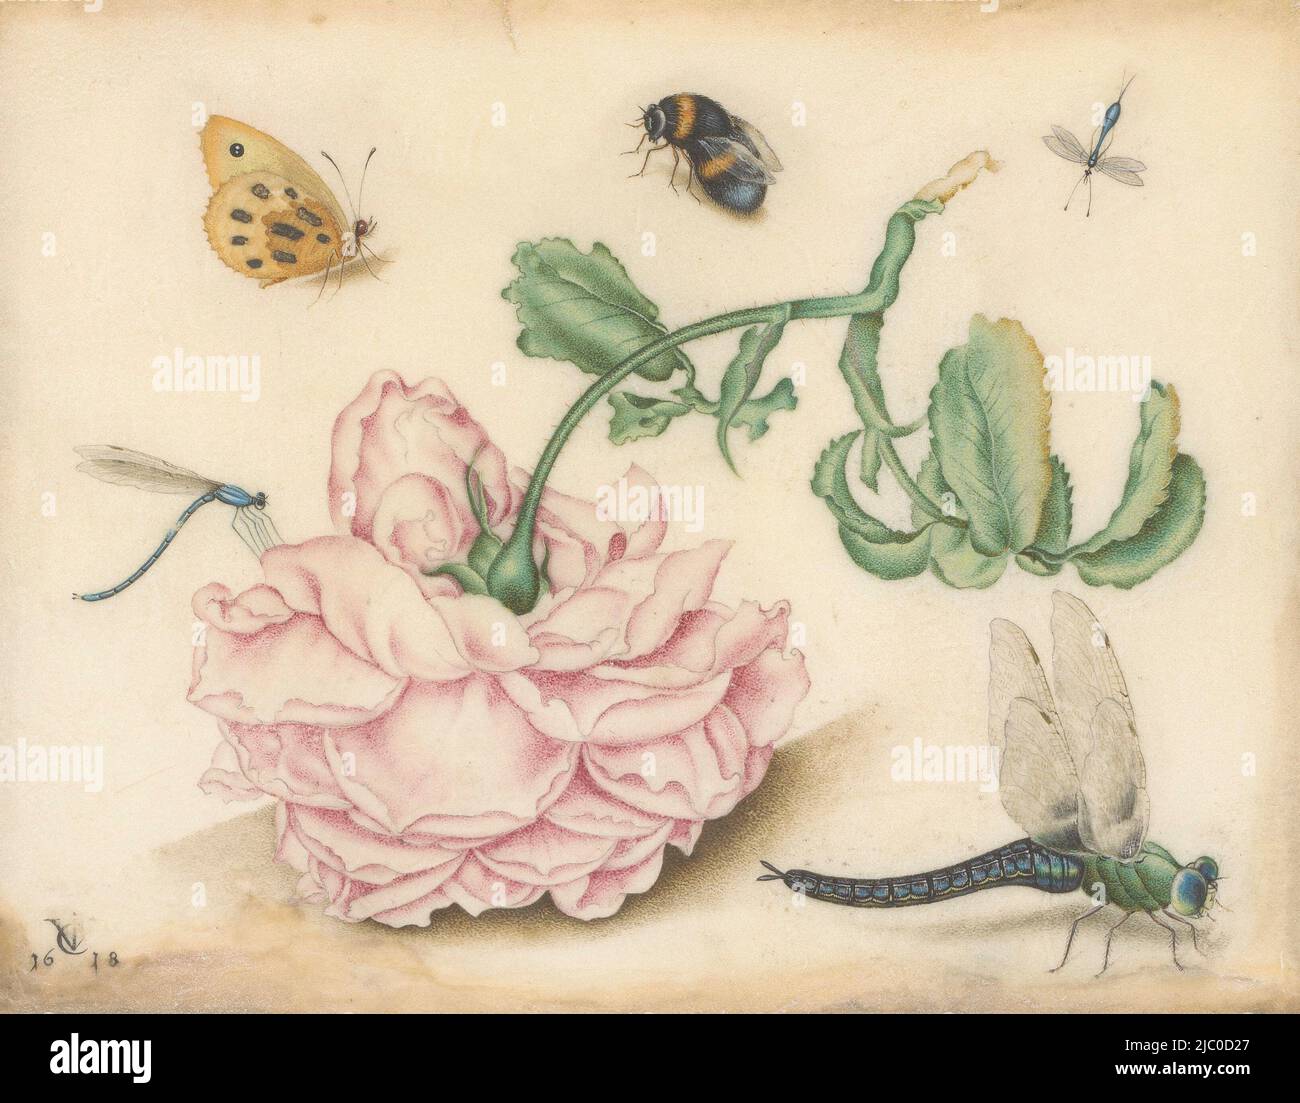 A Rose and Five Insects Rose and Five Insects, draughtsman: Christoffel van den Berghe, (attributed to), draughtsman: Monogrammist CJV, (rejected attribution), 1618, parchment (animal material), h 130 mm × w 166 mm Stock Photo